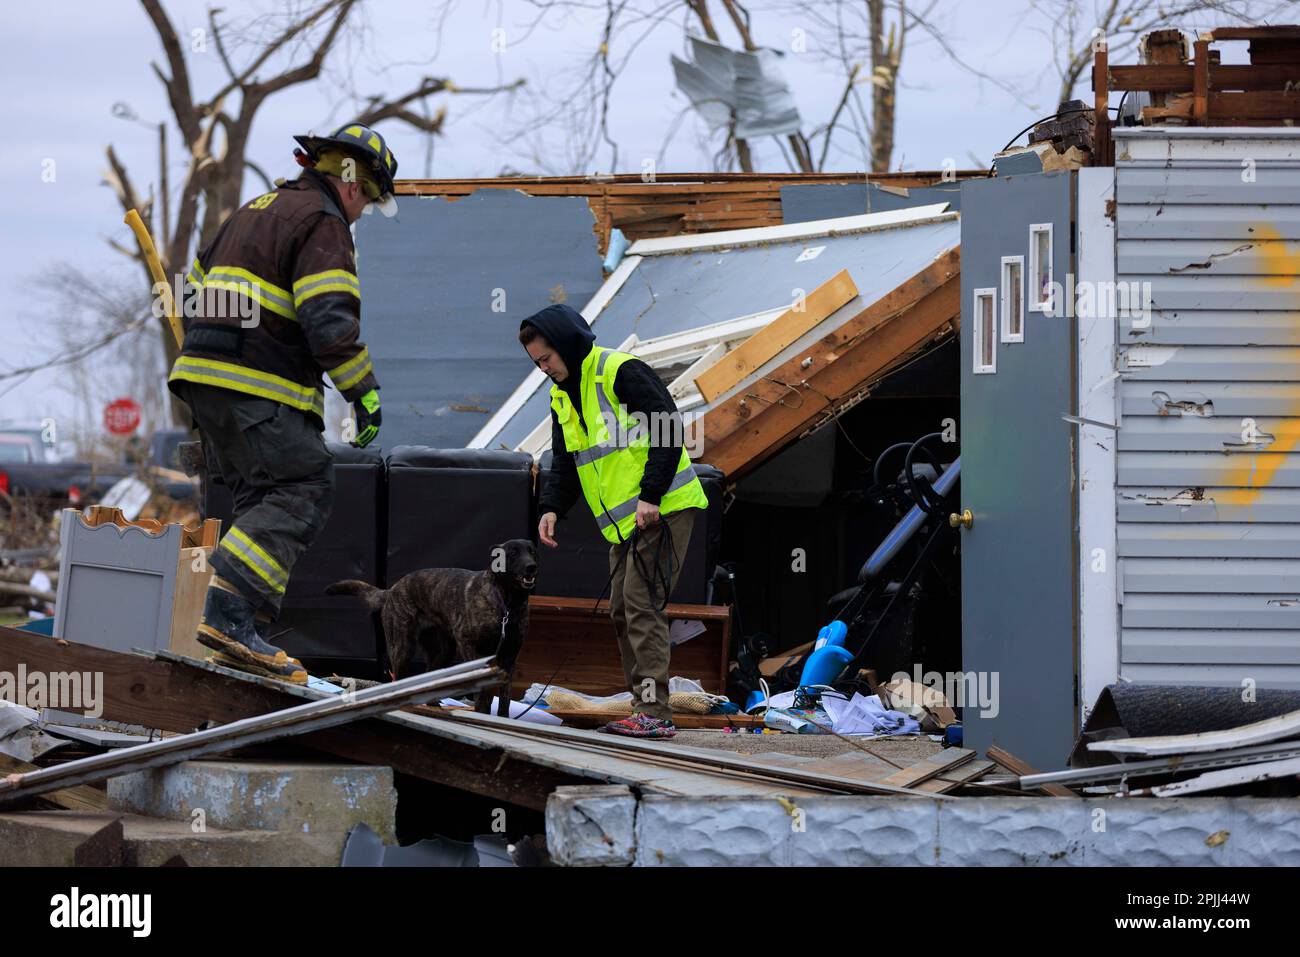 SULLIVAN, INDIANA - APRIL 1: A firefighter and a K9 searcher help with search and rescue operations after a tornado on April 1, 2023 in Sullivan, Indiana. Three people were declared dead, and 8 others were injured, as the search and rescue operation continued Saturday afternoon. The severe storm that created the tornado struck Friday, March 31, 2023 and damaged about 150 homes and structures in Sullivan. (Photo by Jeremy Hogan/The Bloomingtonian) Stock Photo